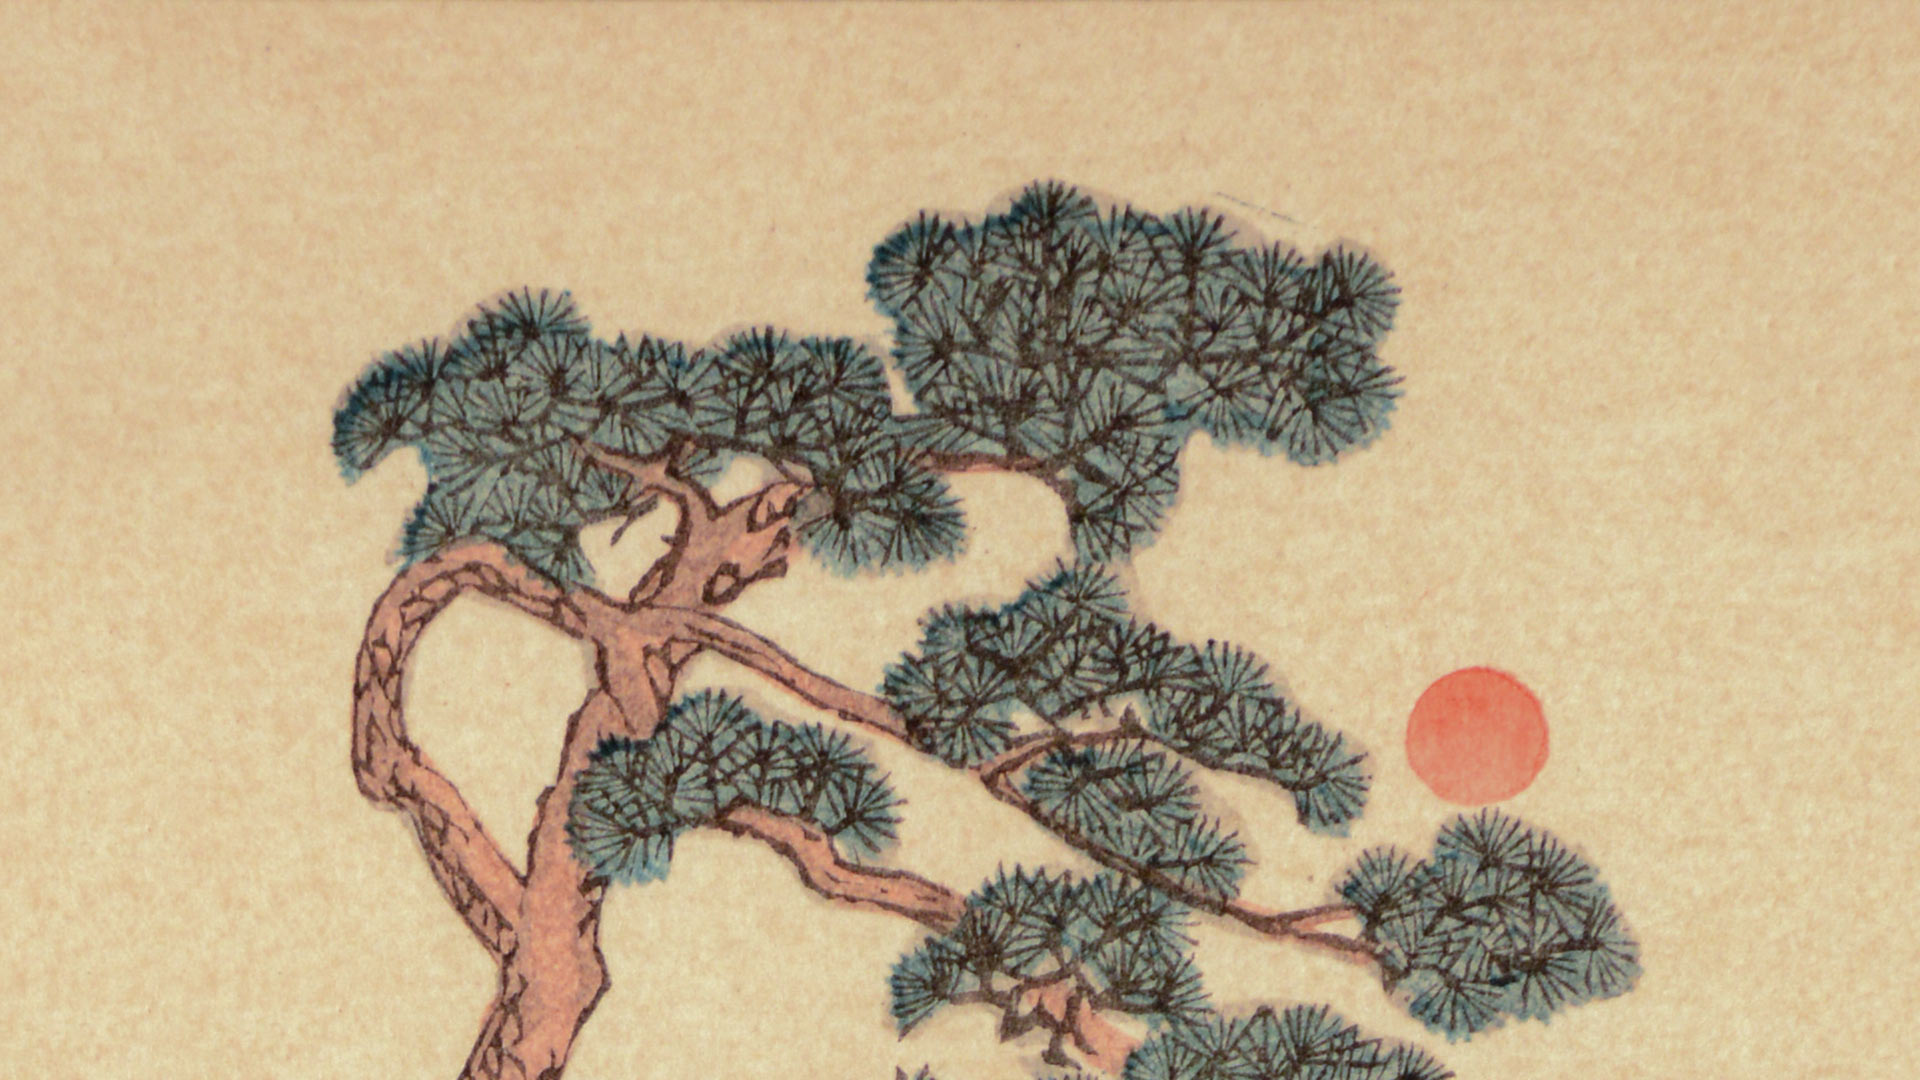 East Asian watercolor painting of a winding tree with an orange sun set against an off-yellow background.